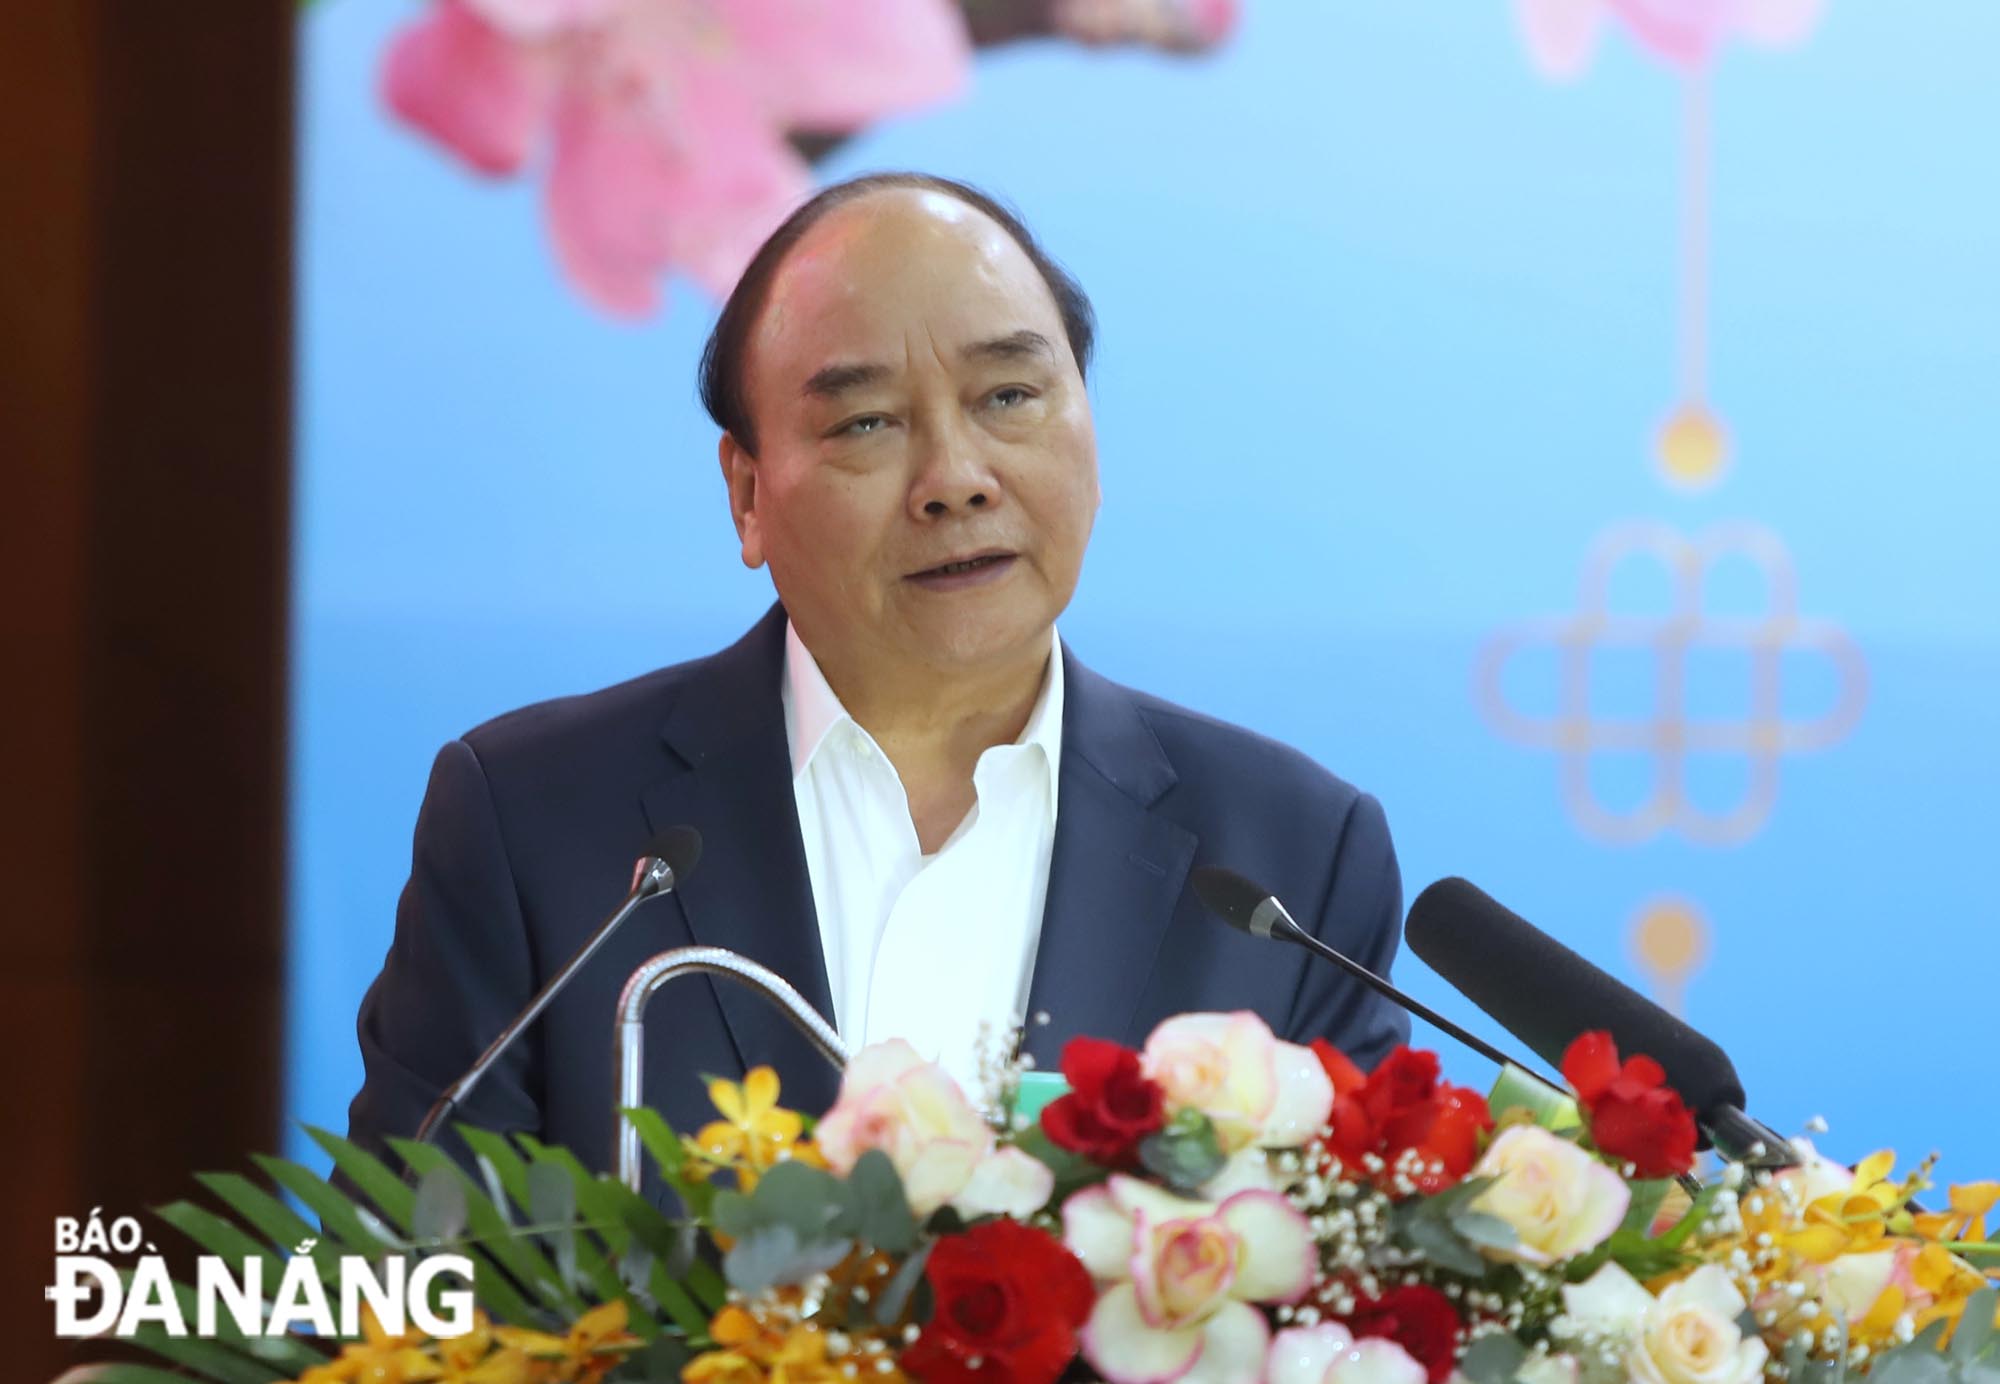 State President Nguyen Xuan Phuc speaking at the gift-giving ceremony